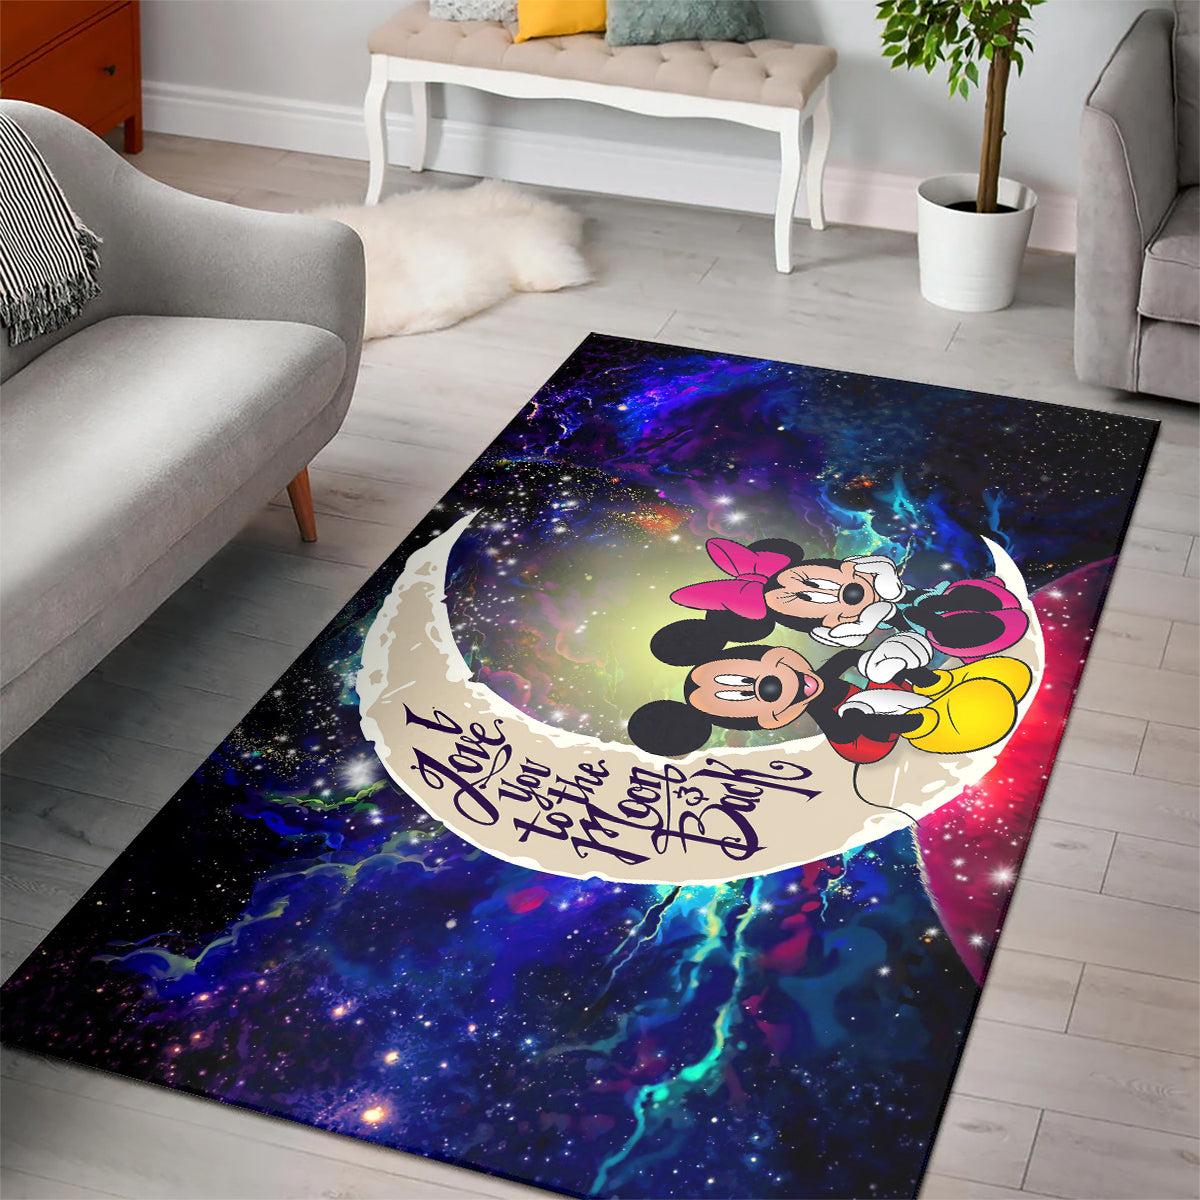 Mice Couple Love You To The Moon Galaxy Carpet Rug Home Room Decor